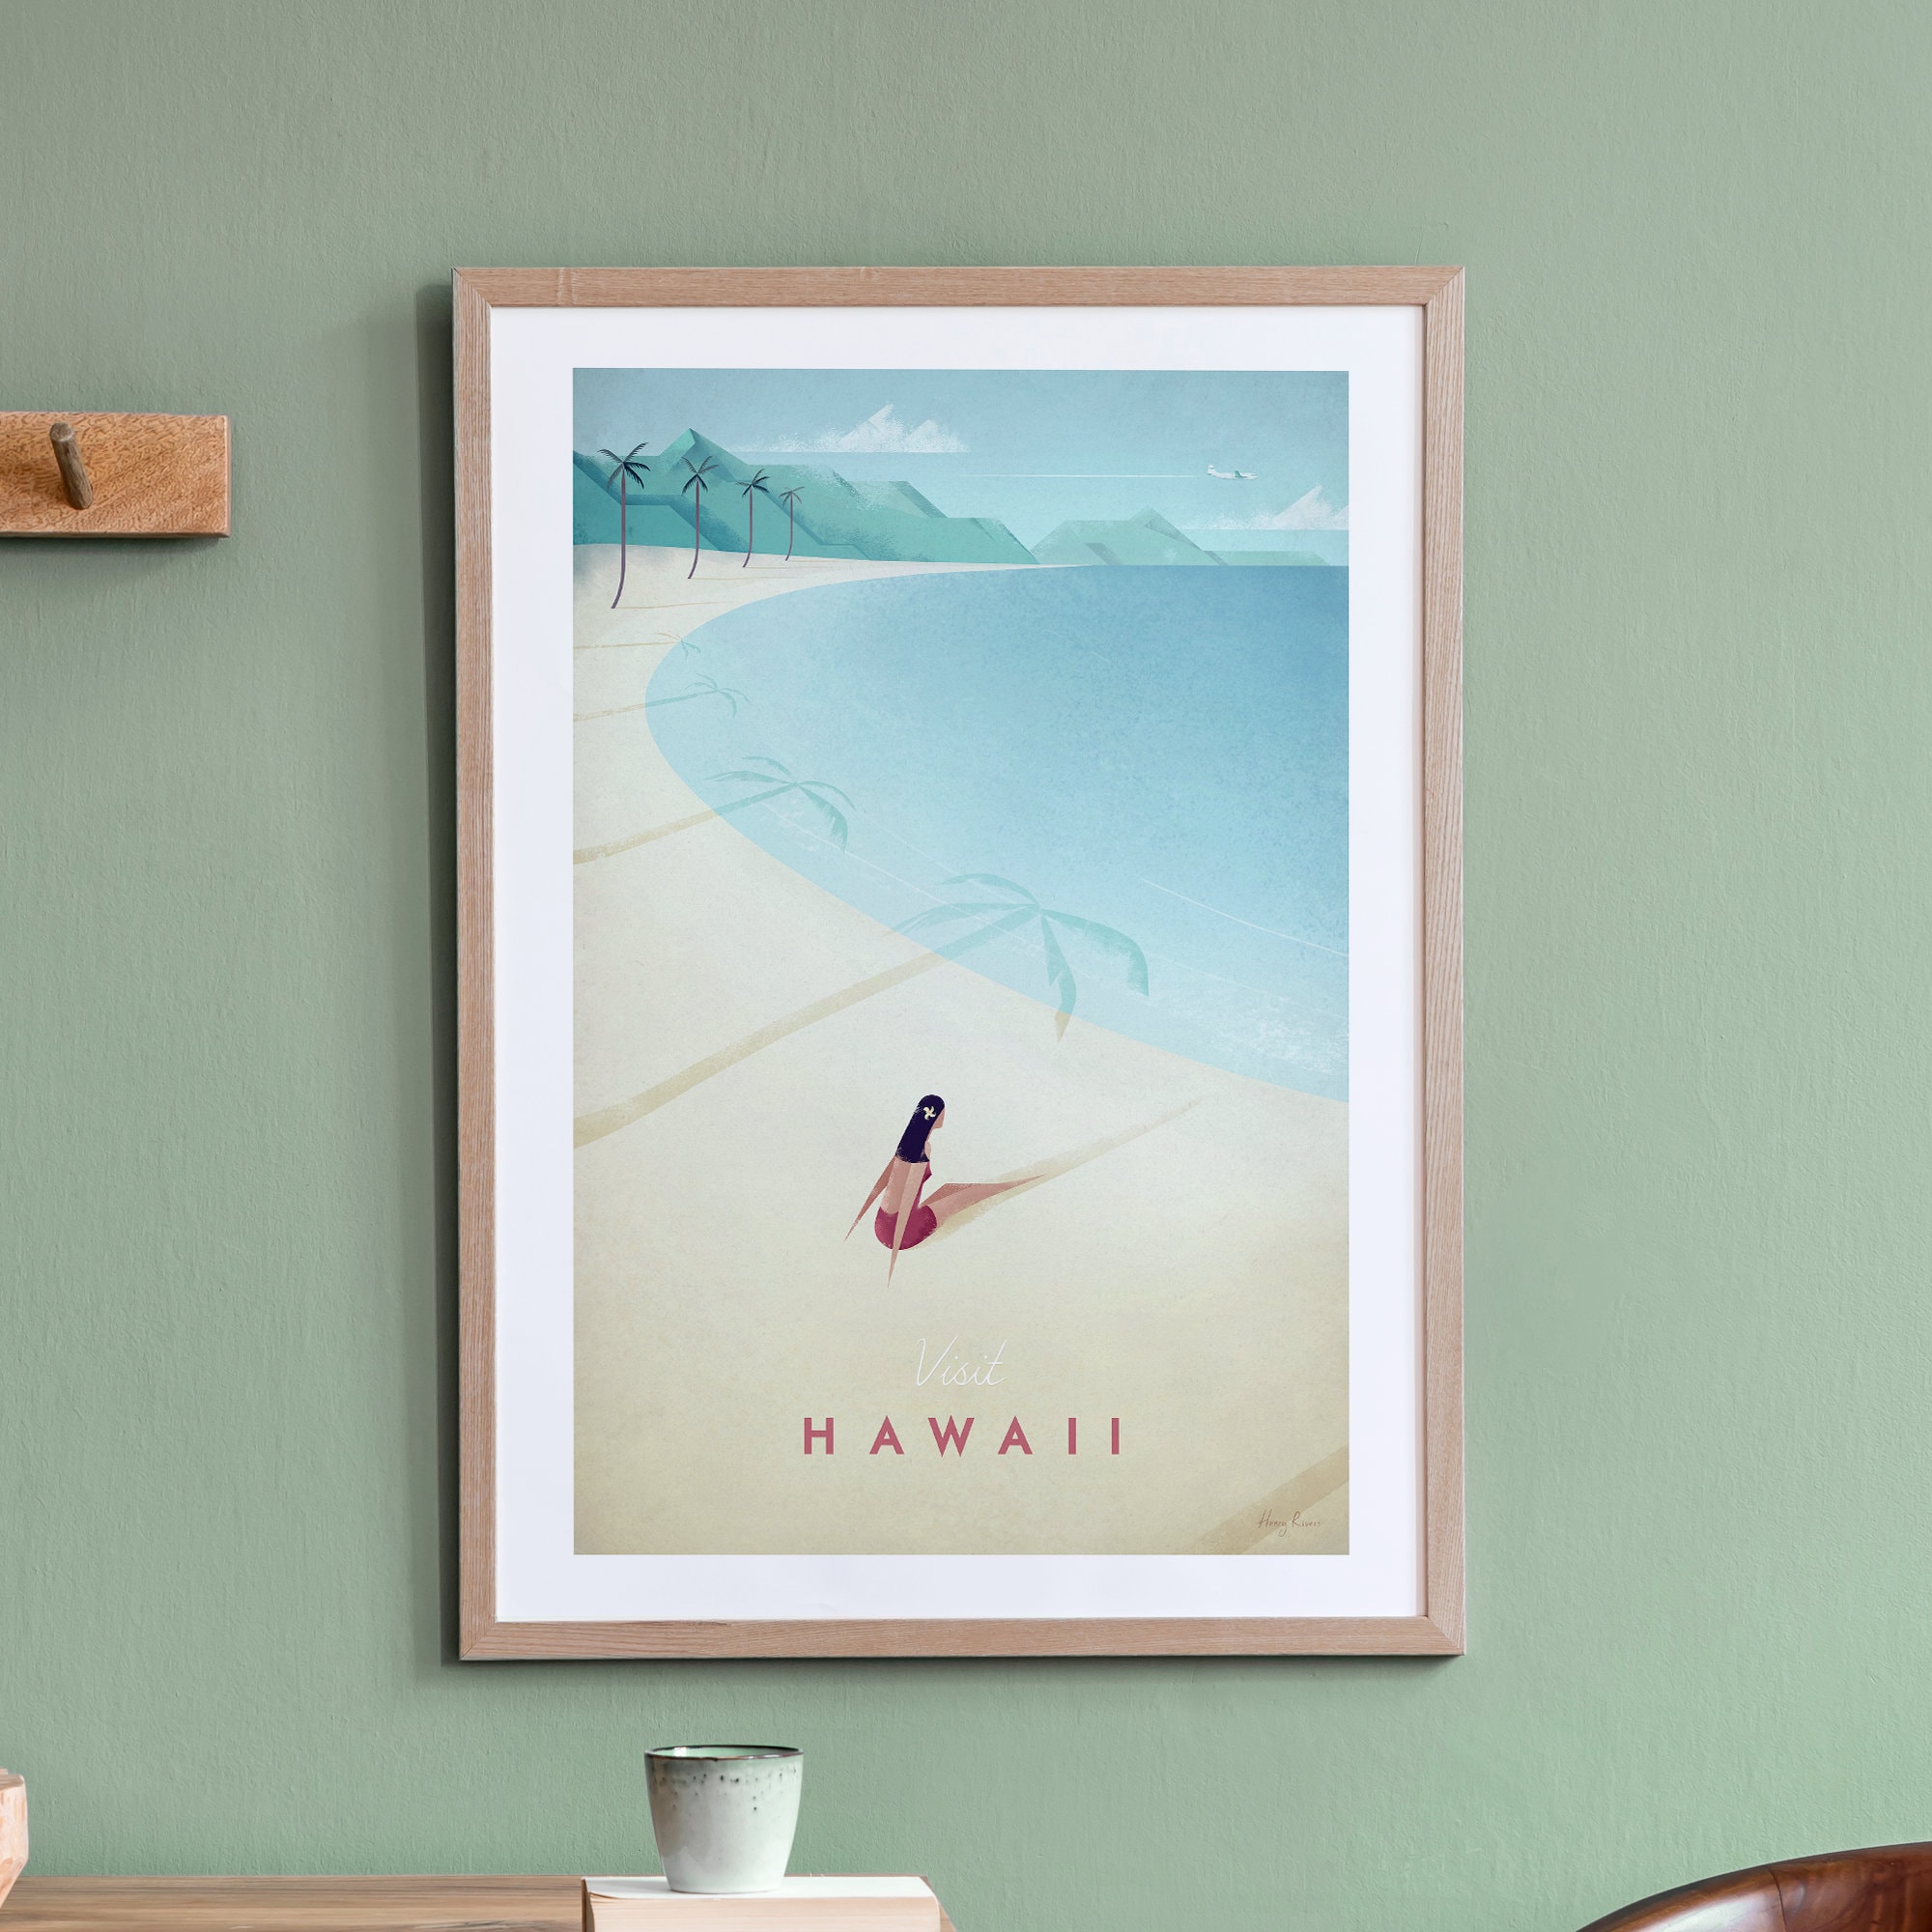 Hawaii Travel Poster Print by Henry Rivers Hawaii Travel | Etsy